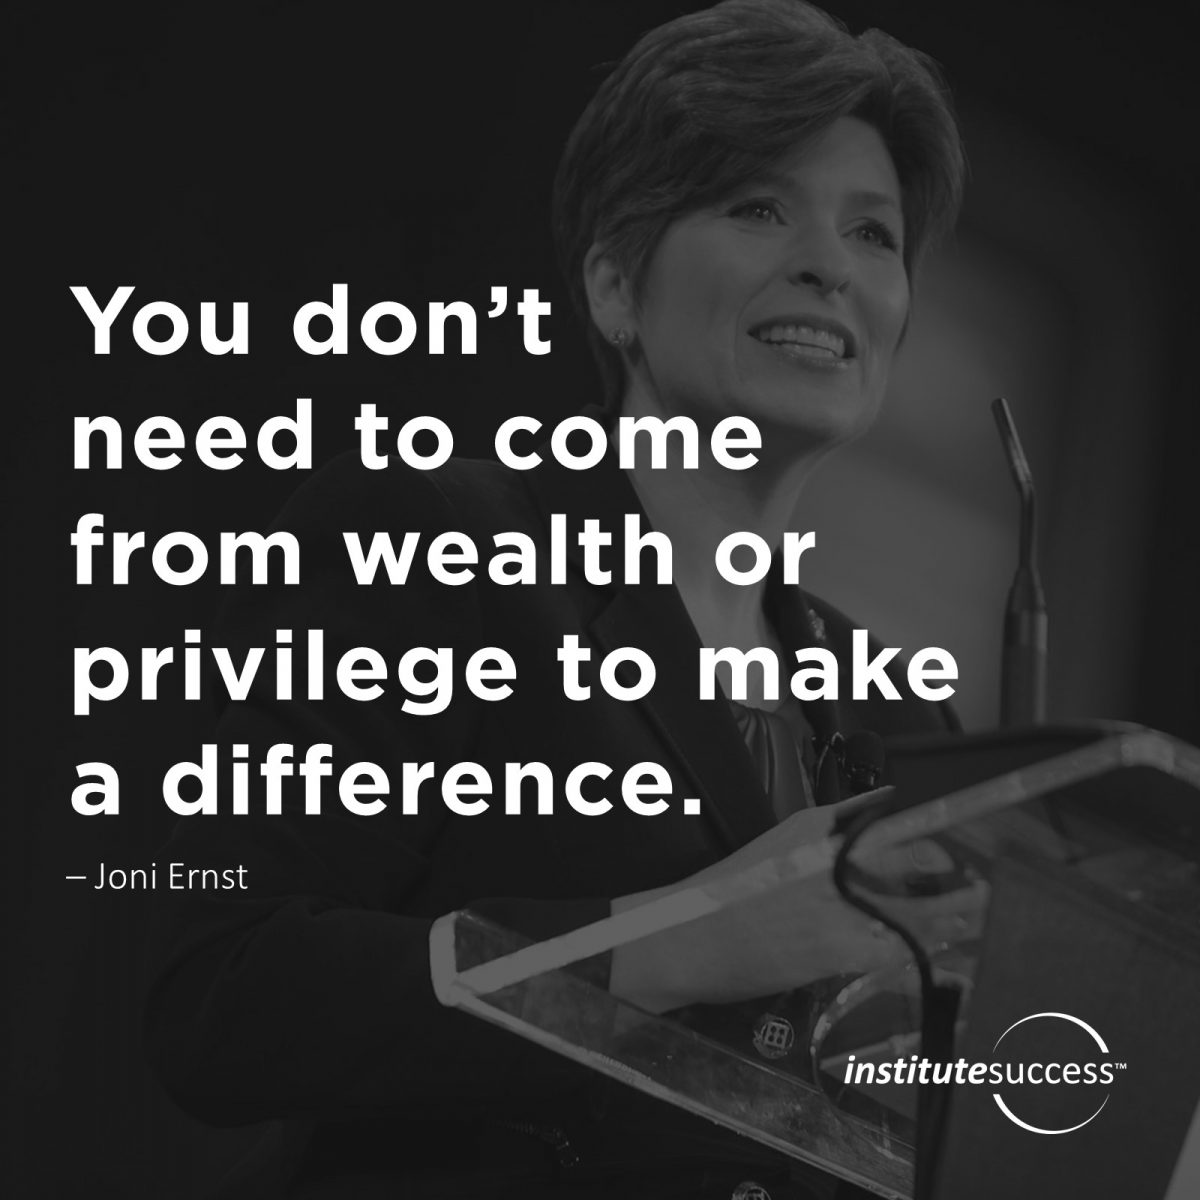 You don’t need to come from wealth or privilege to make a difference. Joni Ernst